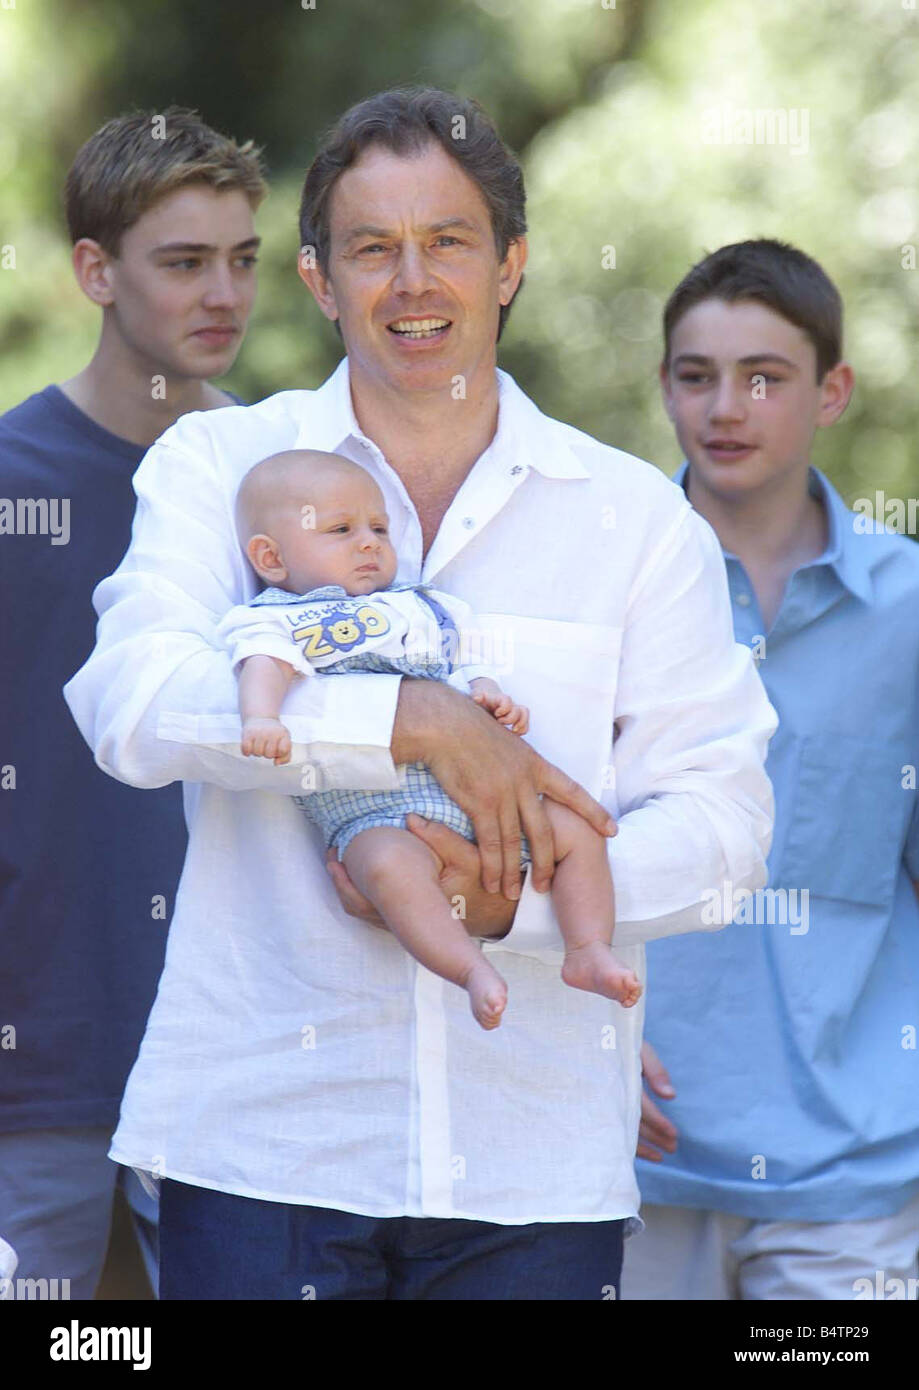 Britain s Prime Minister Tony Blair with baby Leo at Villa Cusona in Tuscany Italy All the Blairs including baby Leo faced the media at the hilltop villa where they are spending their summer break The traditional family photograph session at one point appeared to have been abandoned when Downing Street announced it would not be taking place this year The announcement followed protests from Downing Street that newspapers had refused a specific request by the Blairs to stay away from Leo s christening but officials denied they were acting in retaliation and said the decision to cancel the Stock Photo